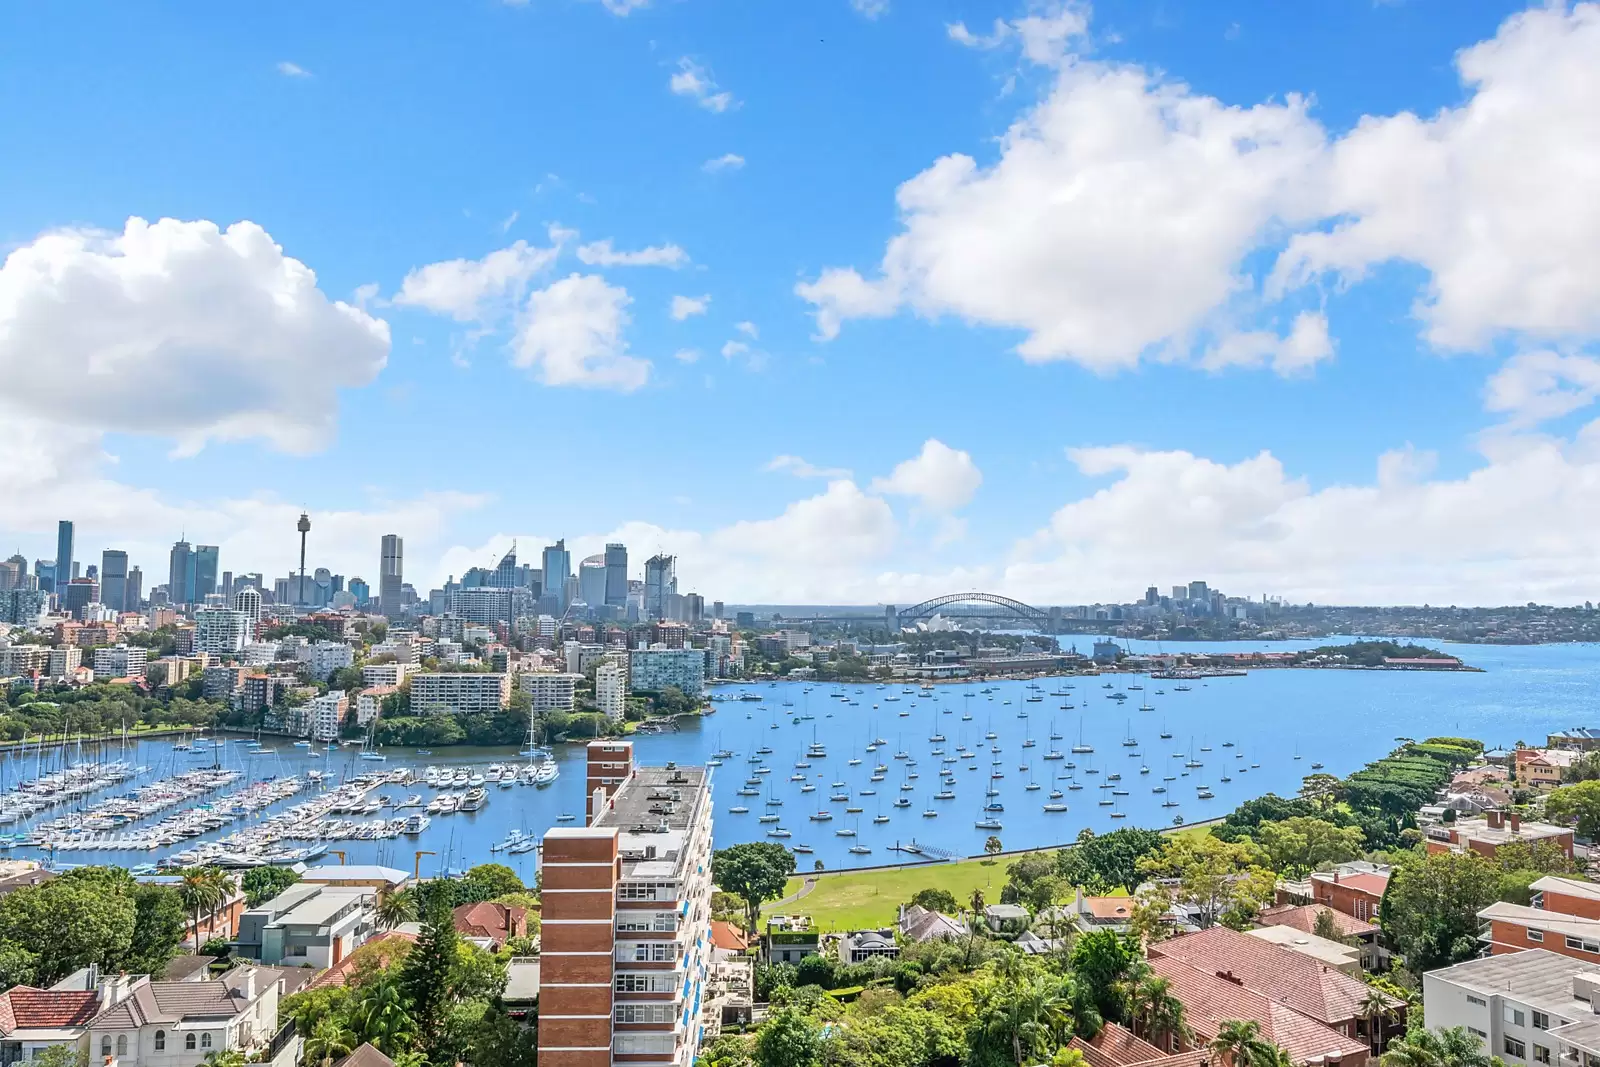 Photo #14: 13/75 Darling Point Road, Darling Point - Sold by Sydney Sotheby's International Realty